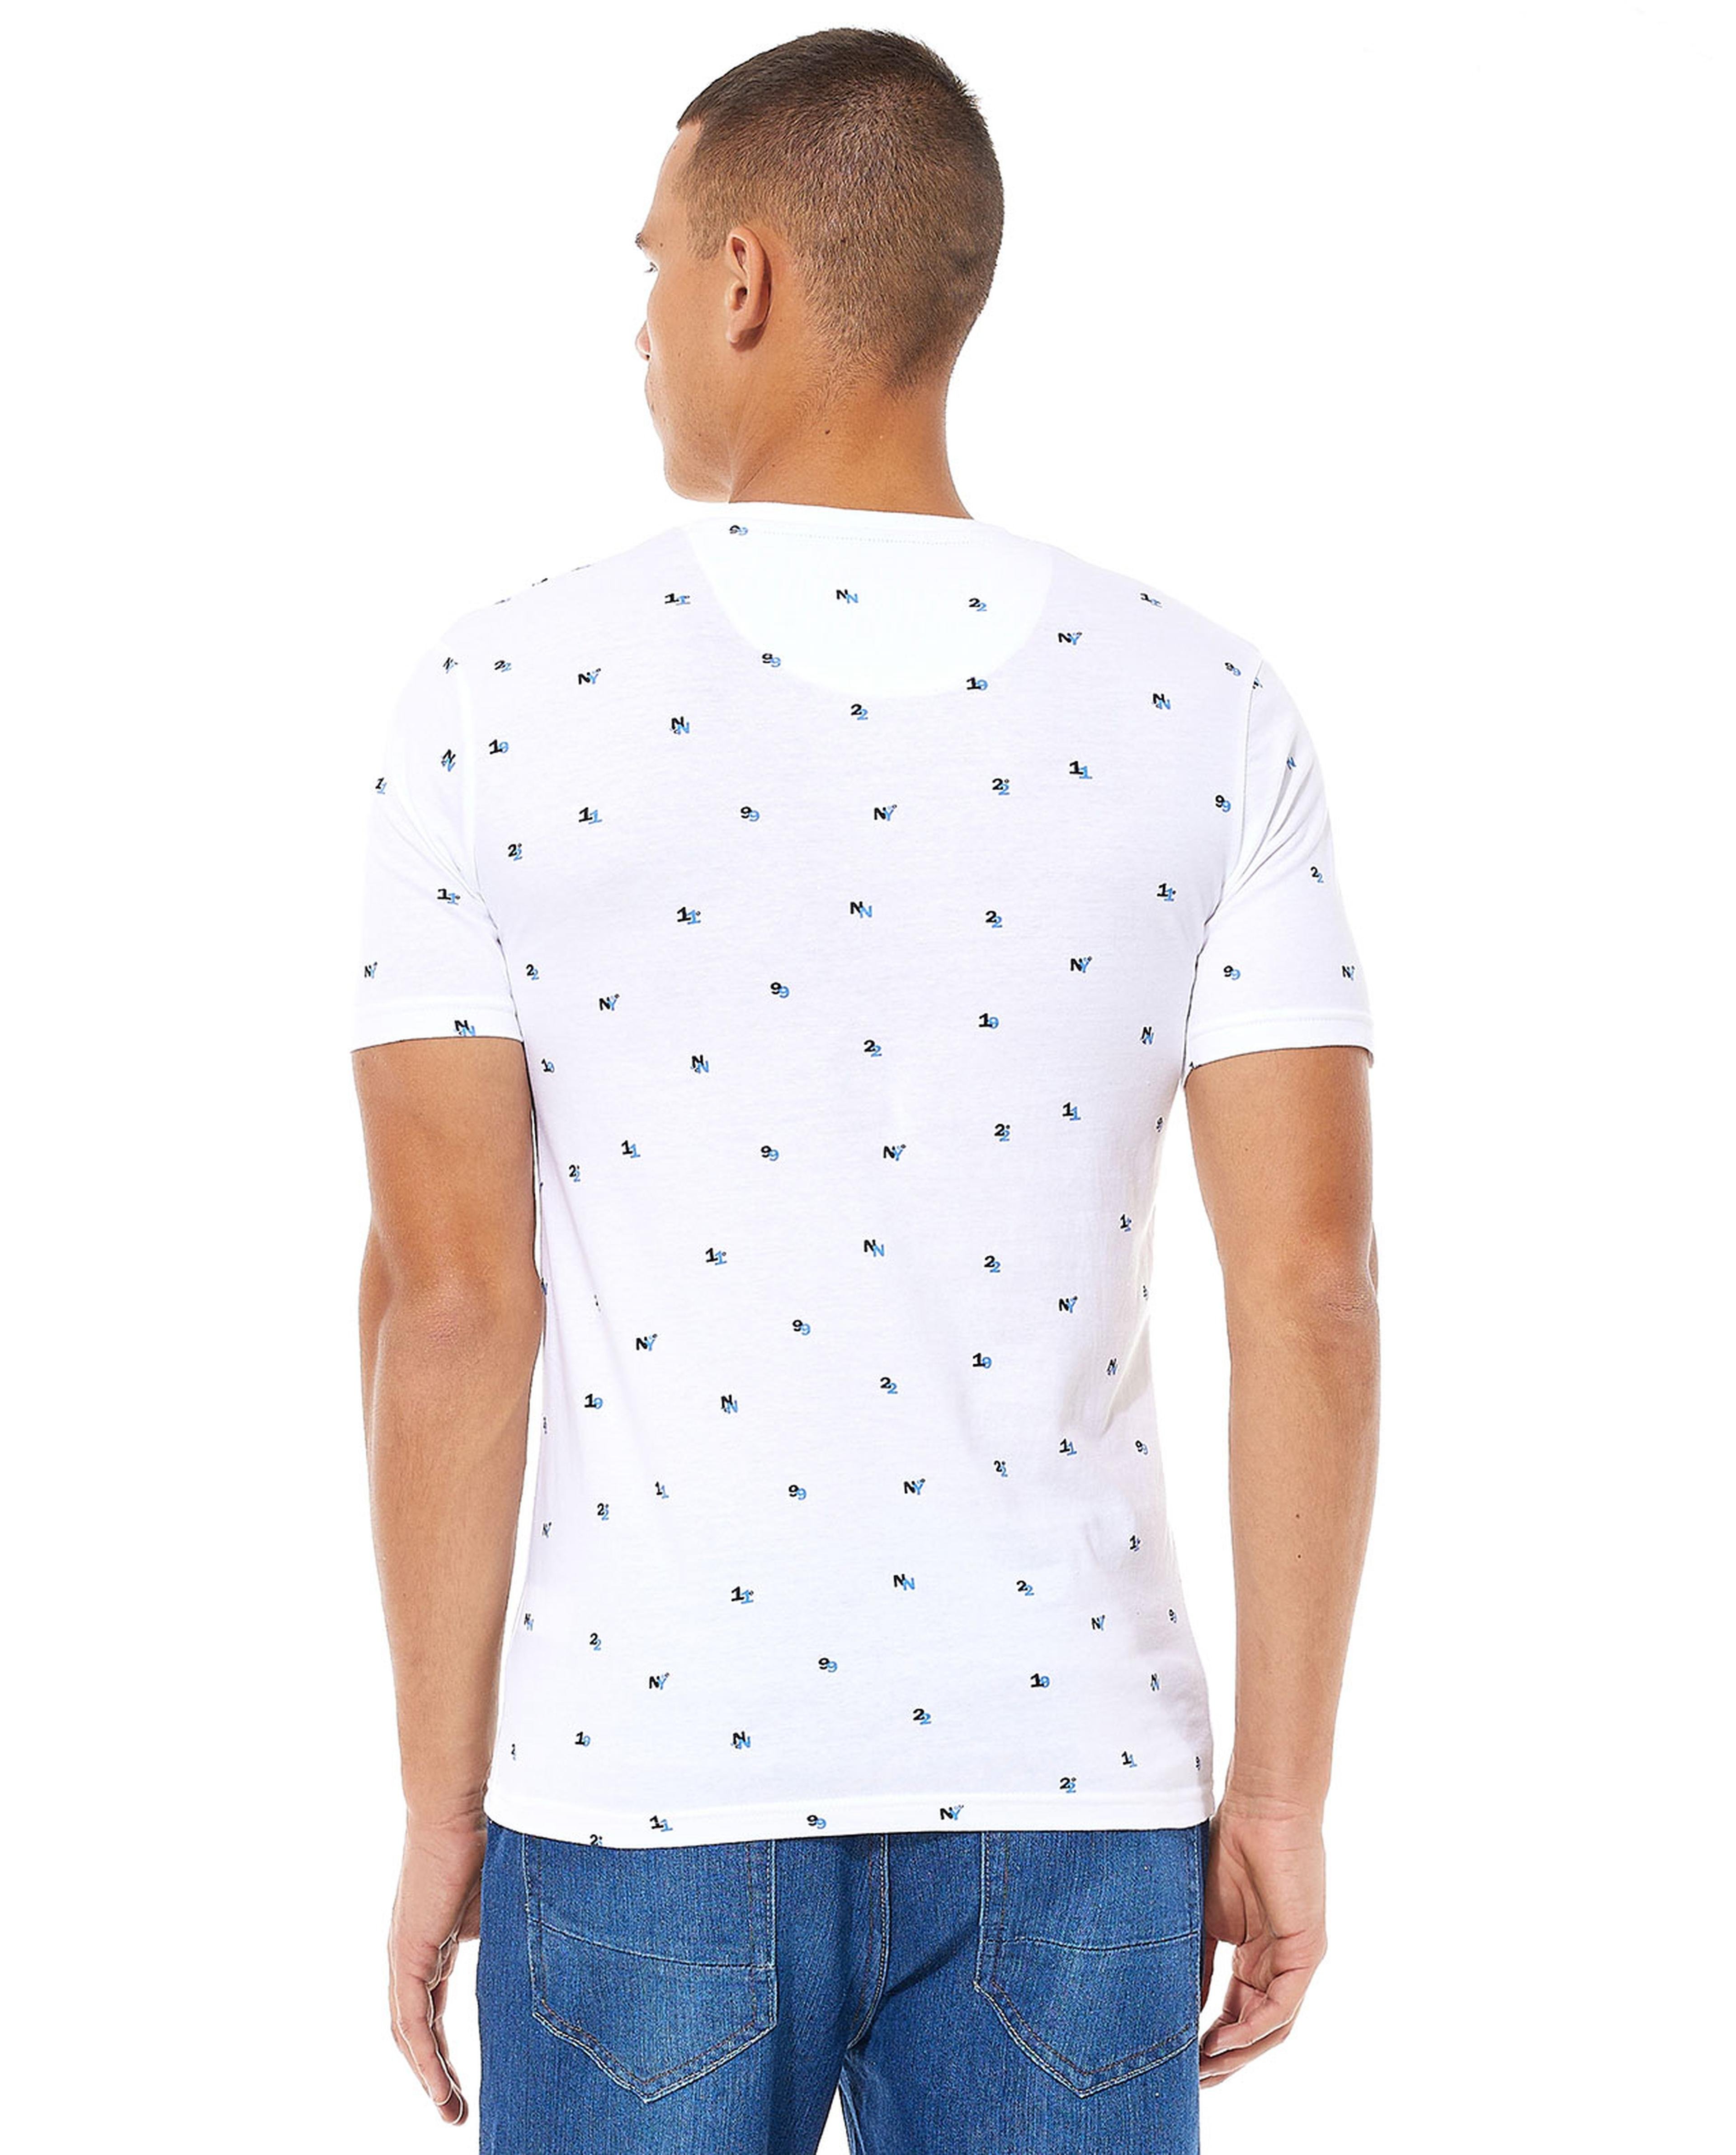 Printed T-Shirt with Crew Neck and Short Sleeves